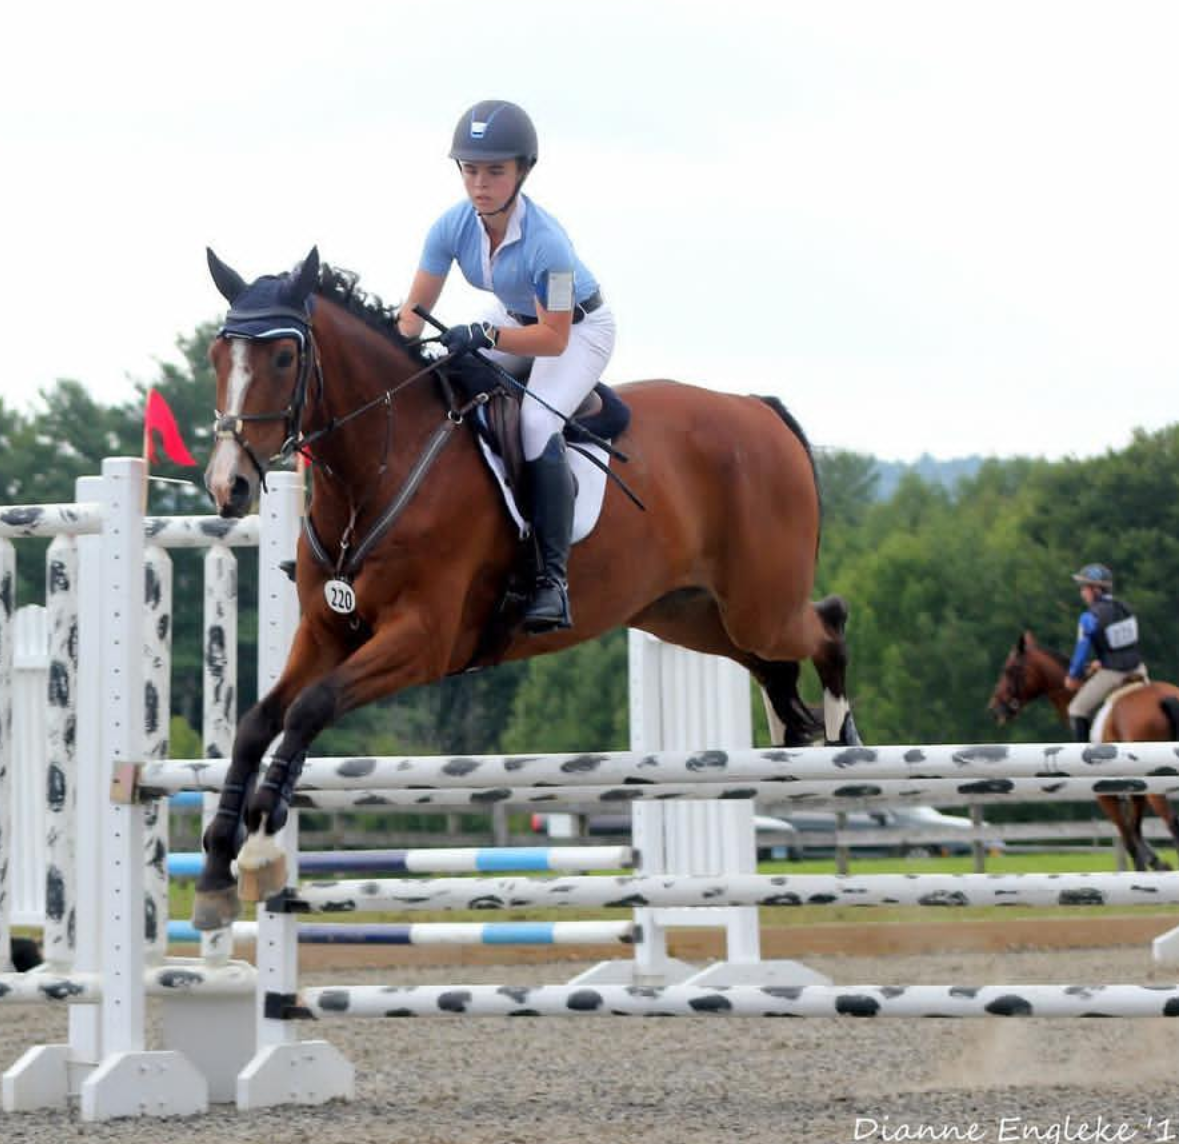 An equestrian rider on a horse mid-jump during a competition, showcasing a moment of focus and skill.